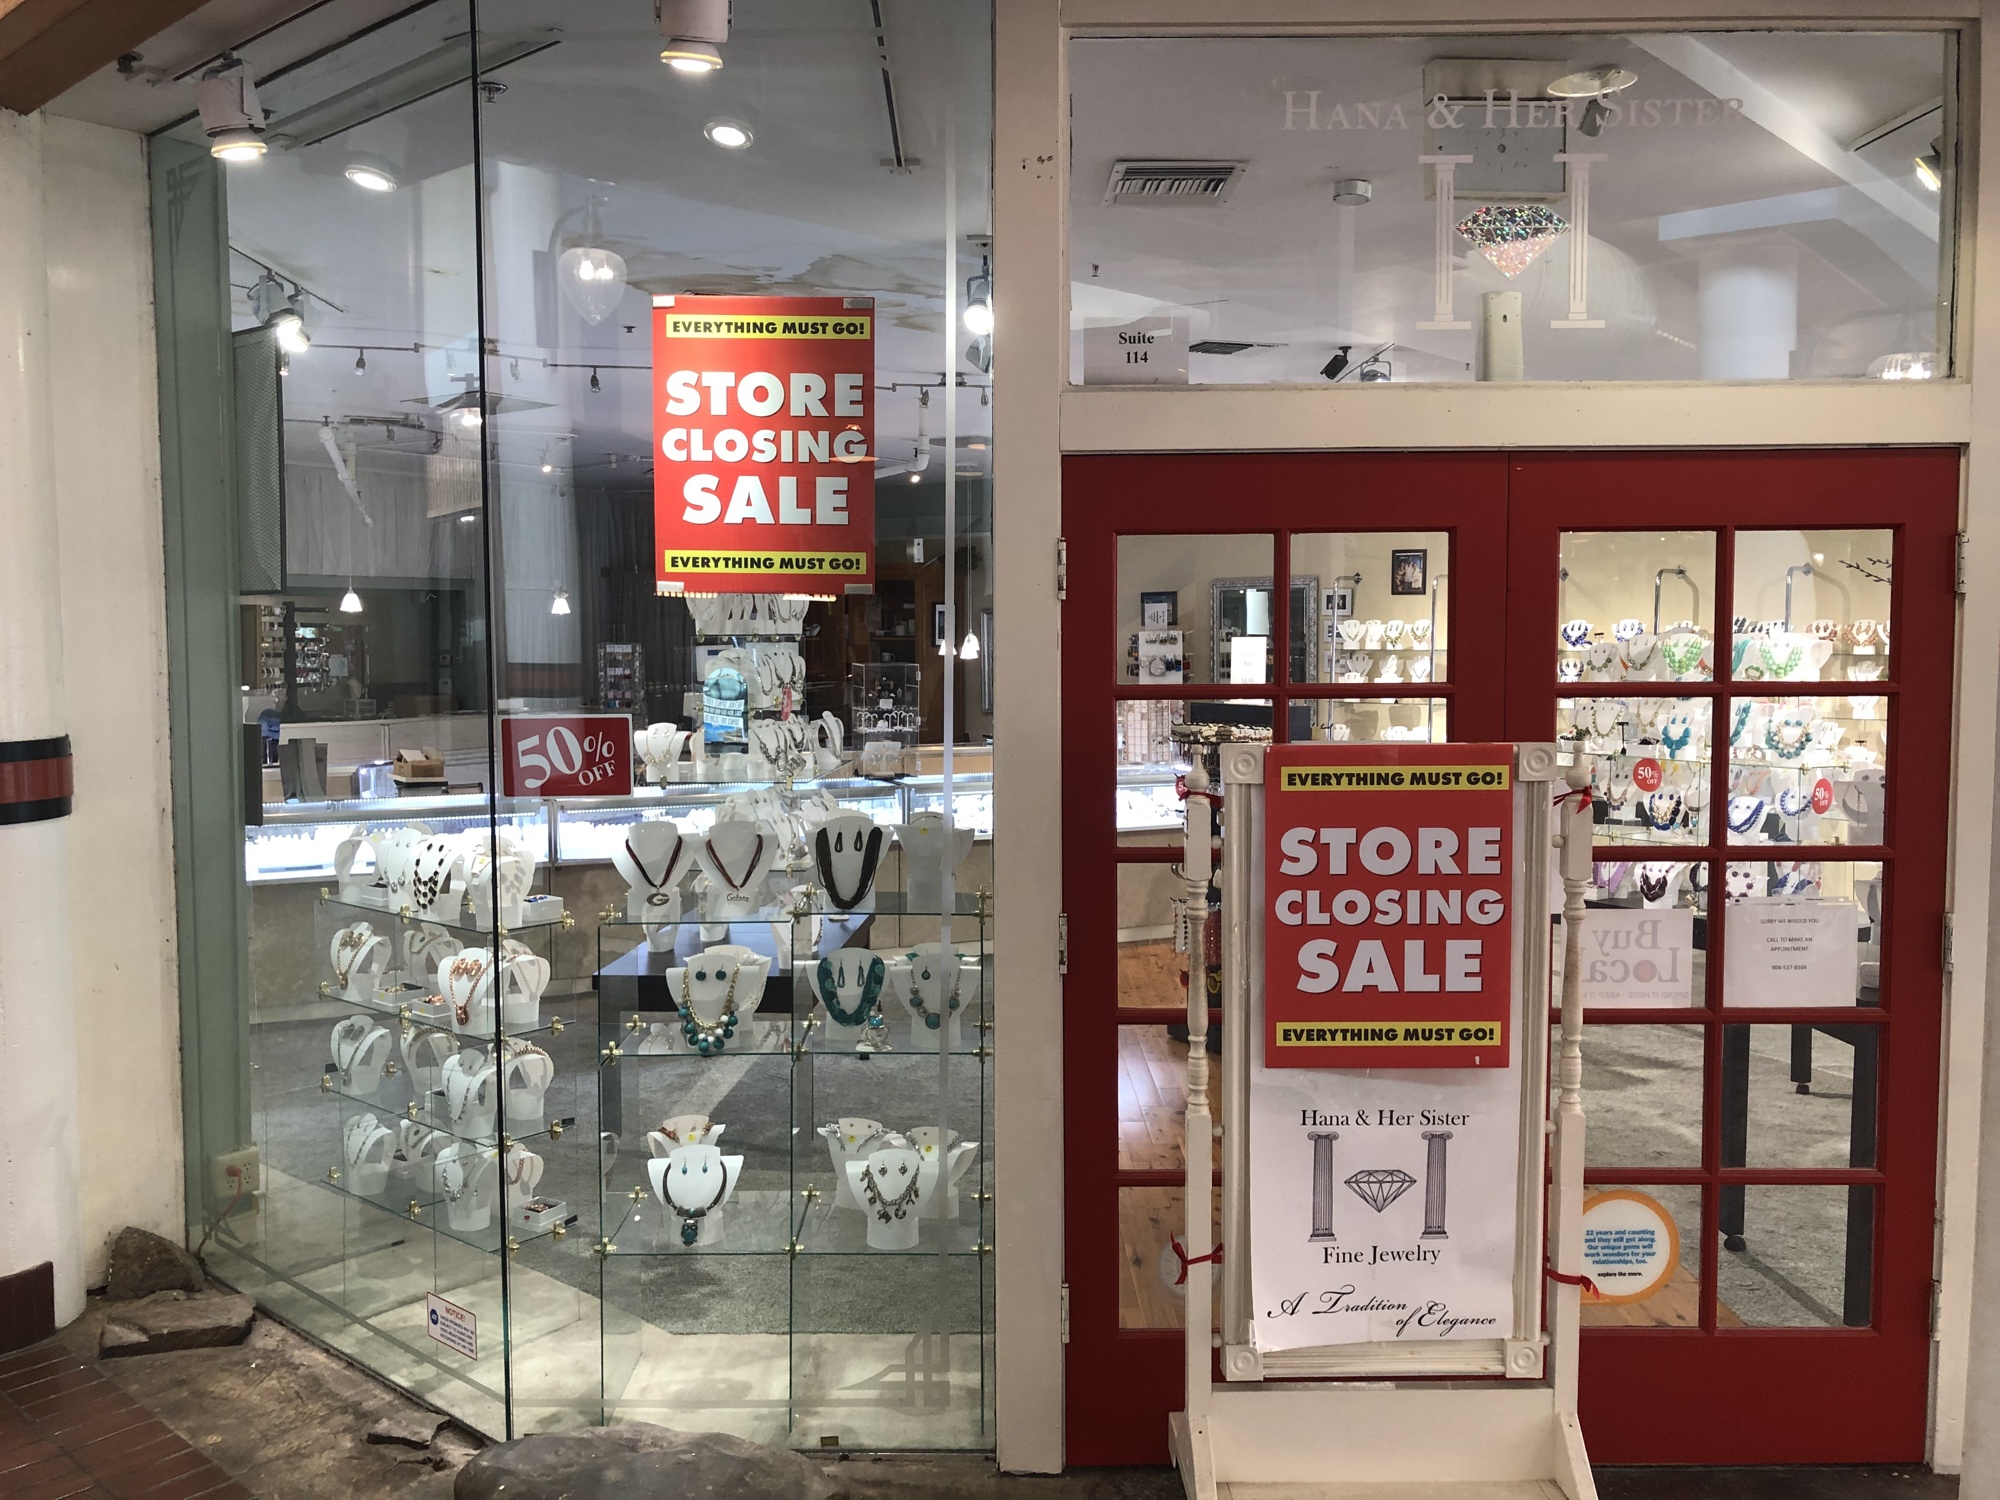 Store closing signs are displayed in the window of Hana & Her Sister jewelry store at The Jacksonville Landing.